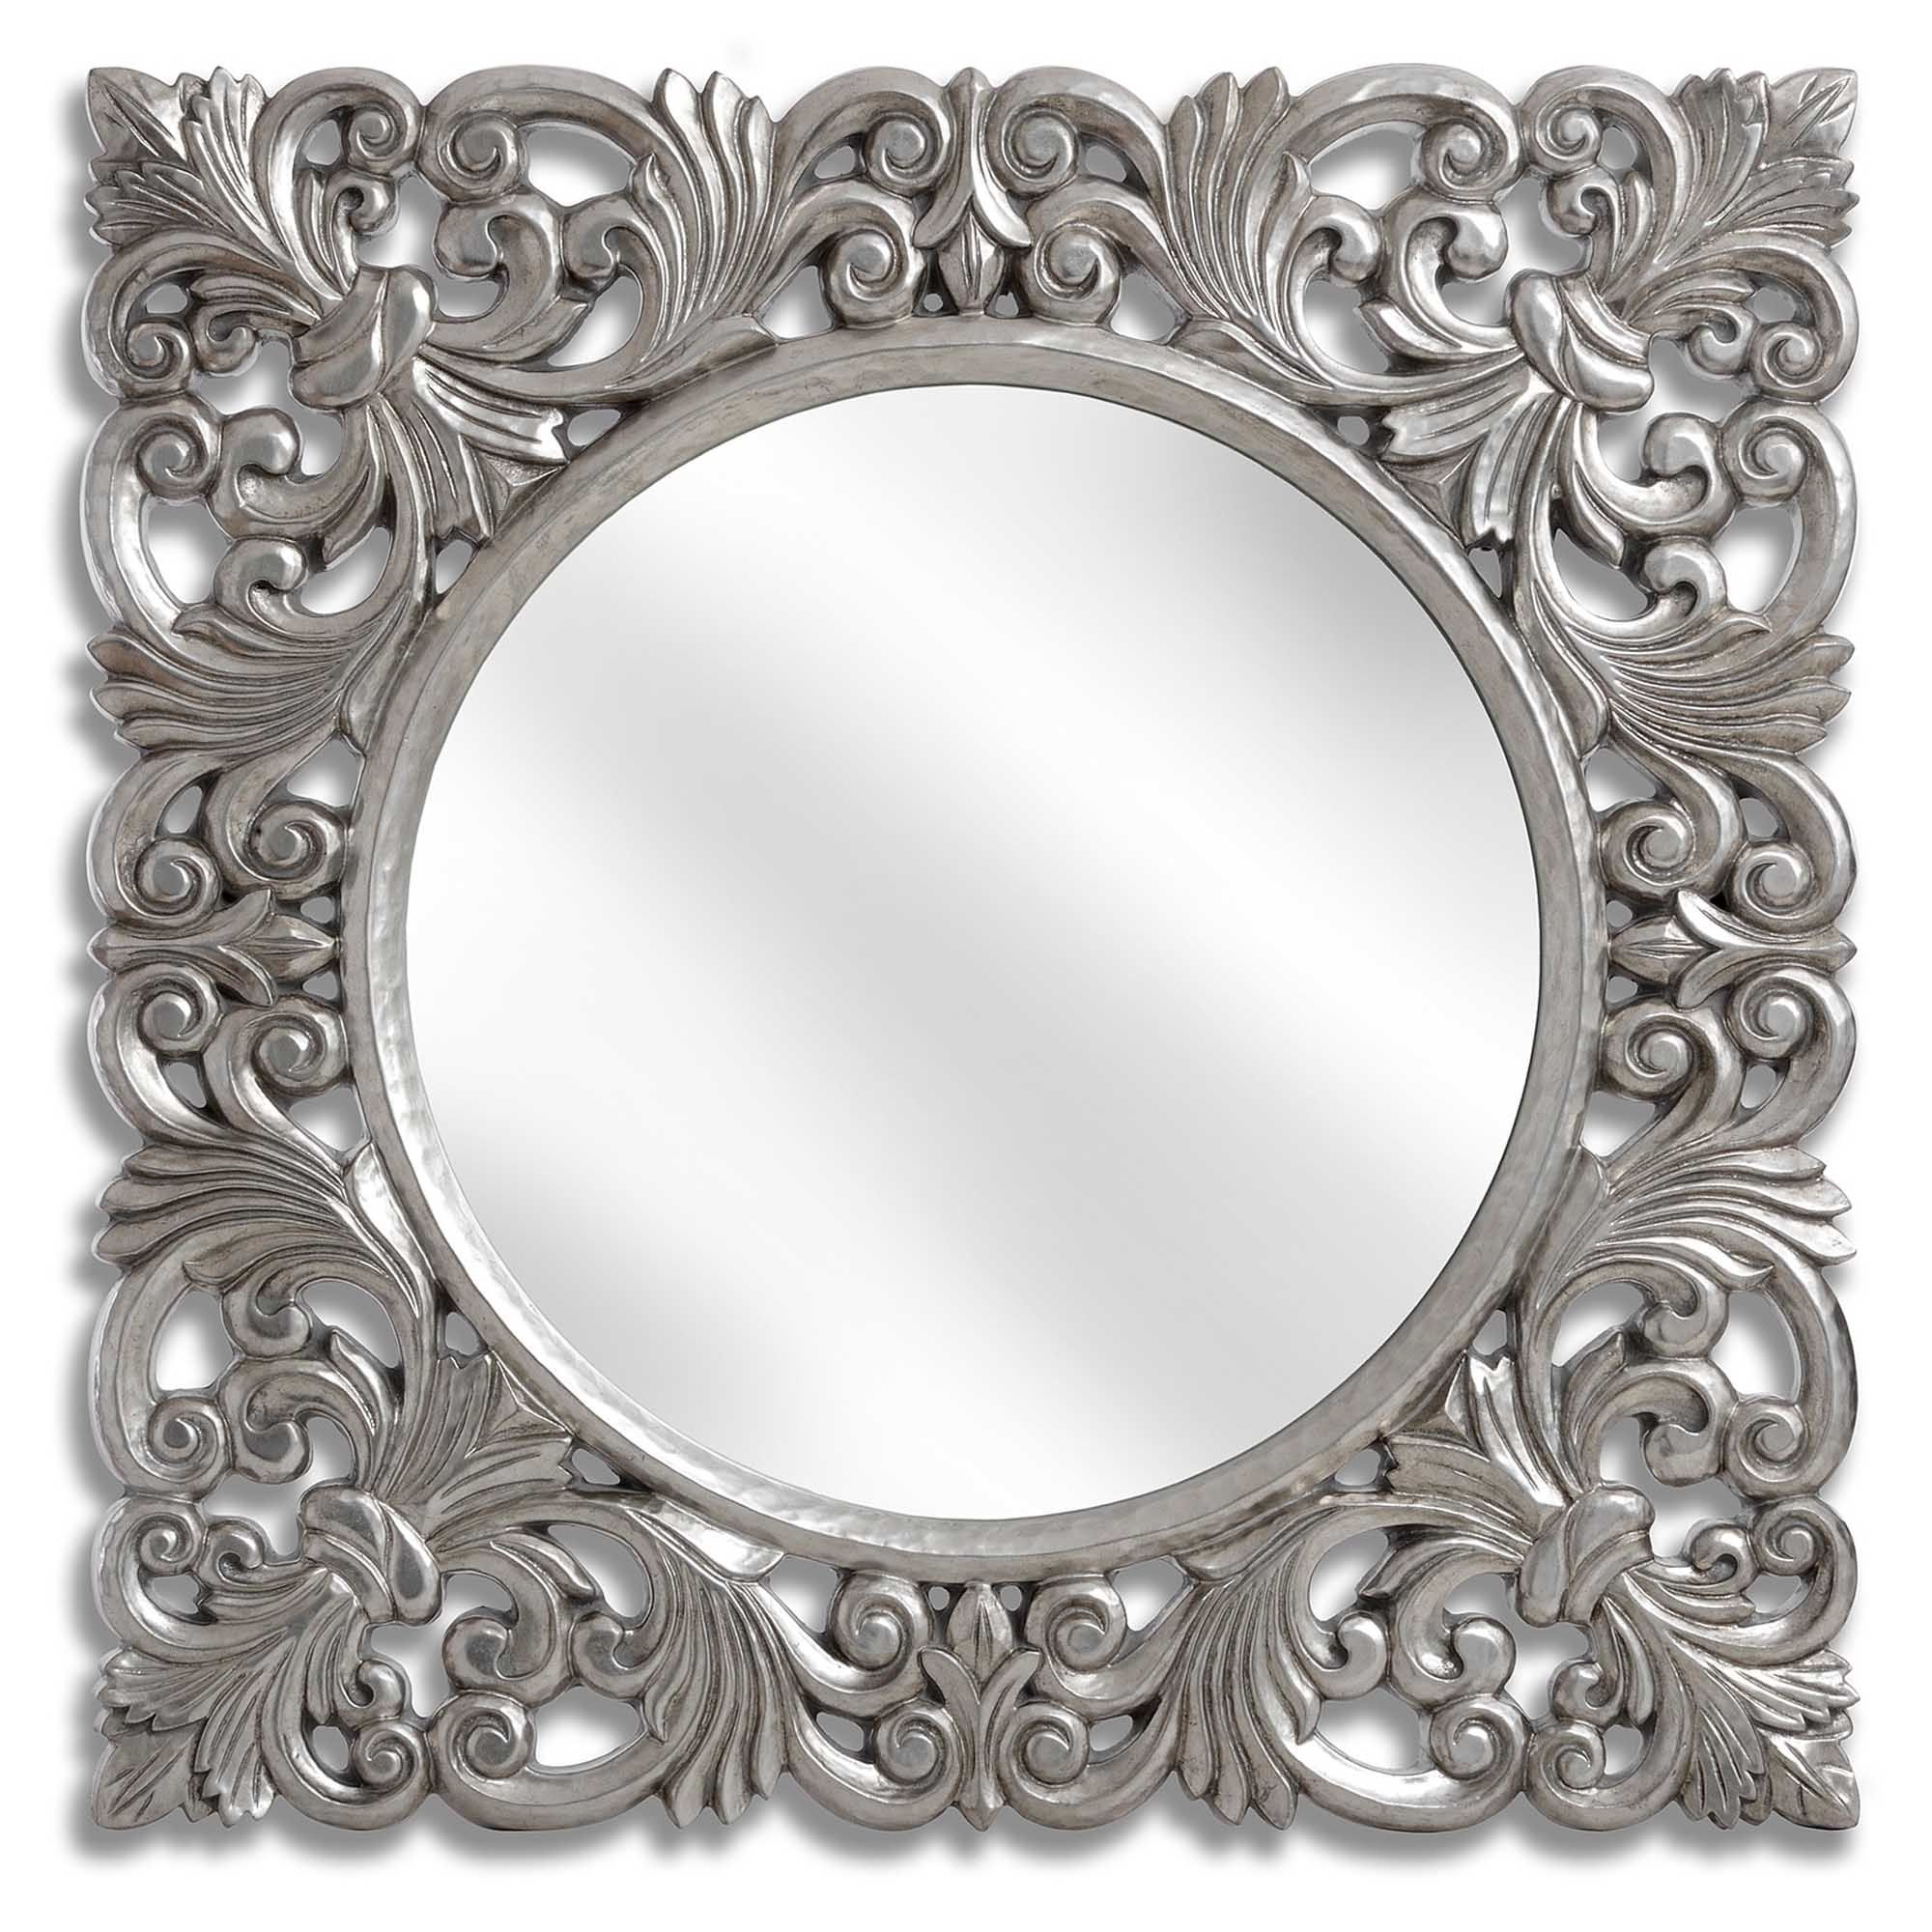 Most Popular Baroque Antique French Style Silver Wall Mirror Intended For Baroque Wall Mirrors (View 1 of 20)